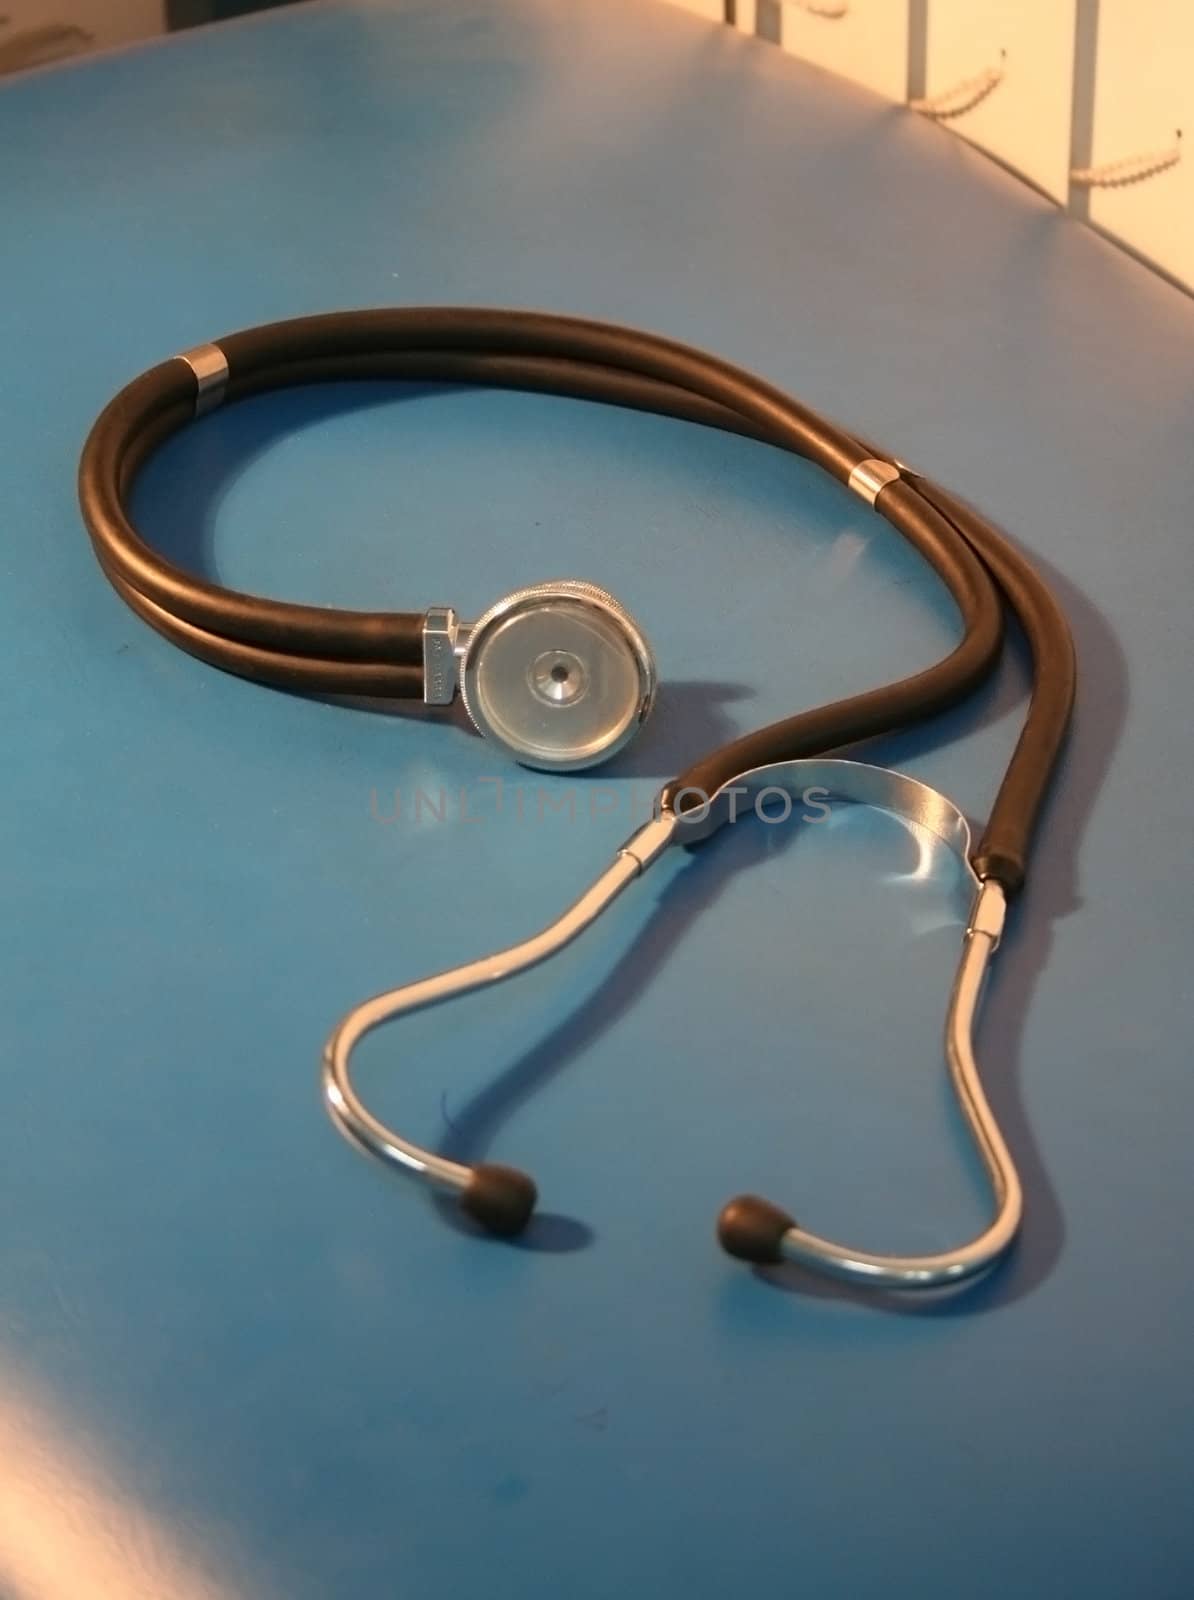 stethoscope on blue table